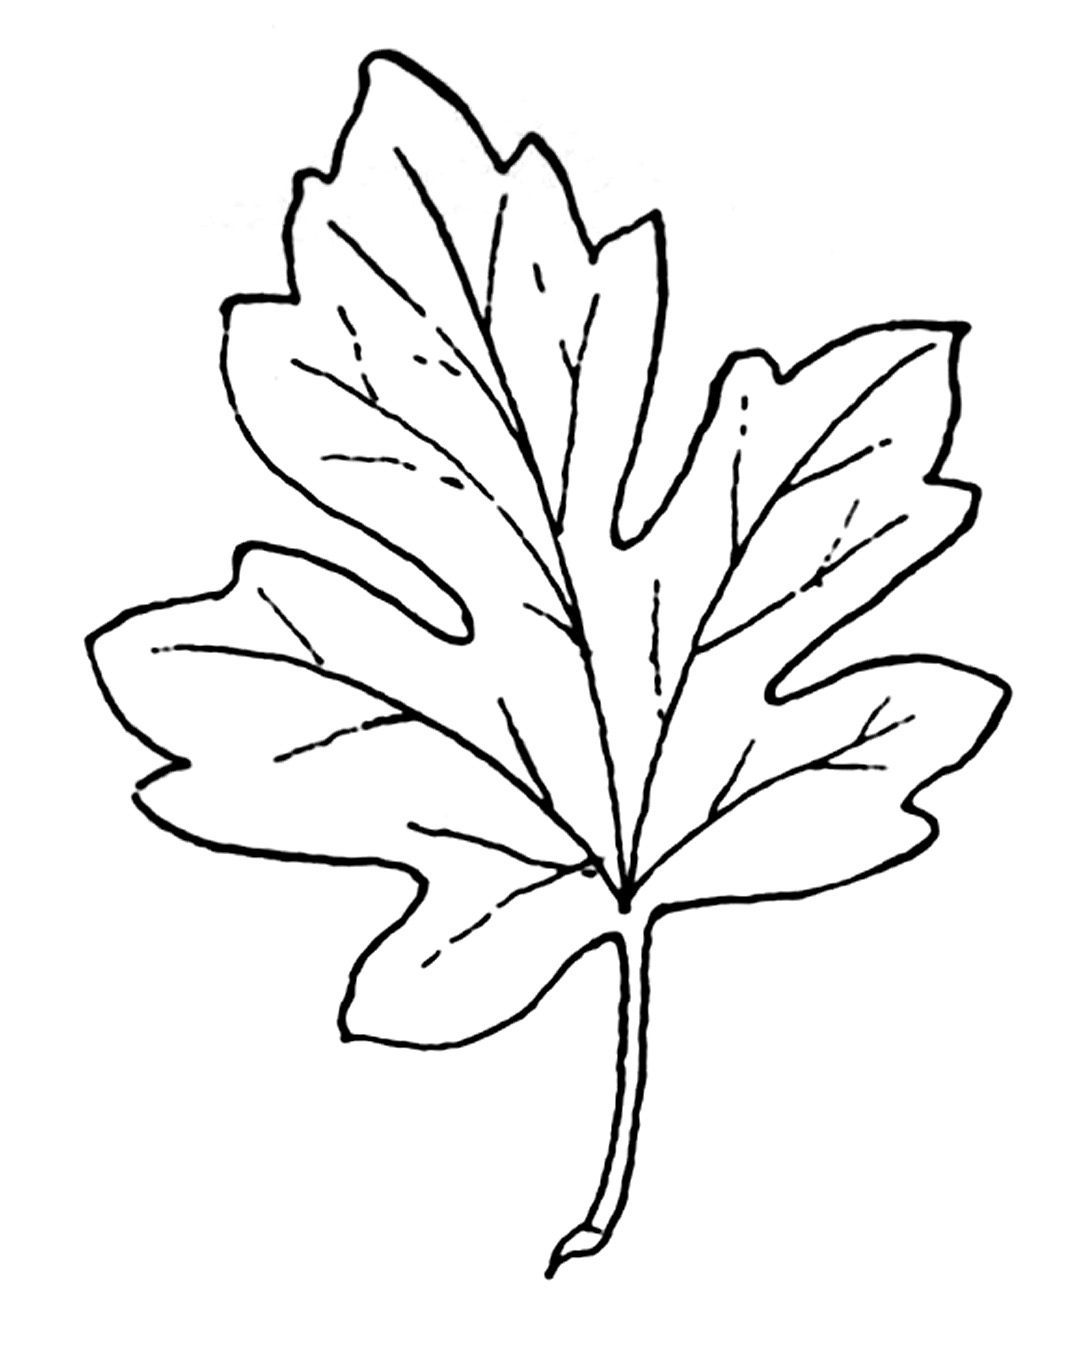 Leaf black and white clipart